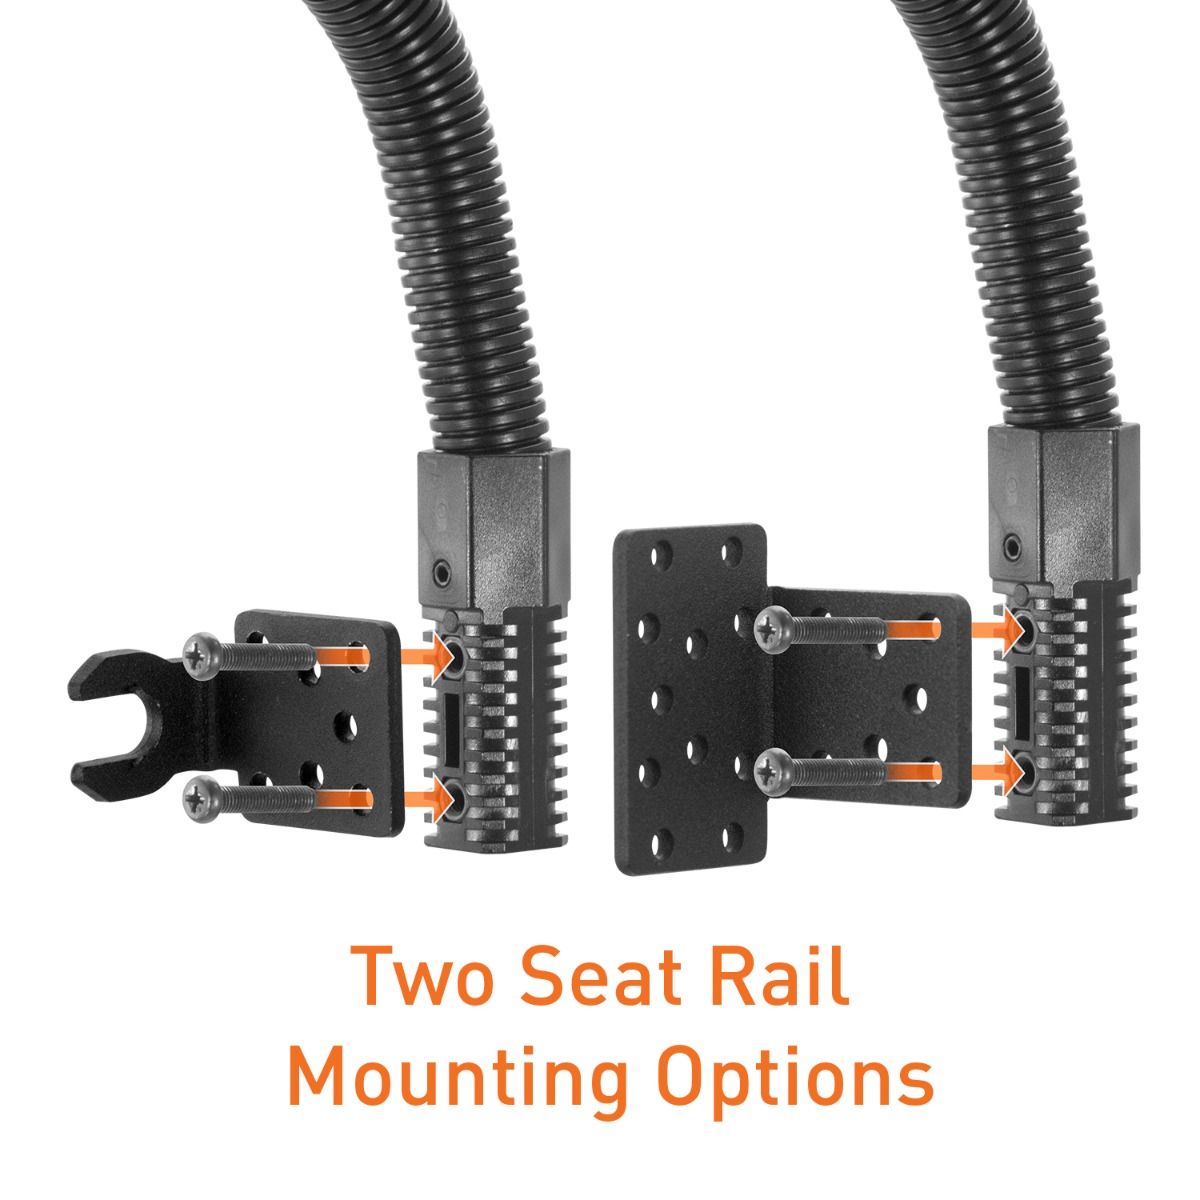 iBOLT™ IncrediBOLT™ Flexpro Heavy Duty Seat Rail Mount w/ 4.25 inch arm & AMPS Plate Adapter